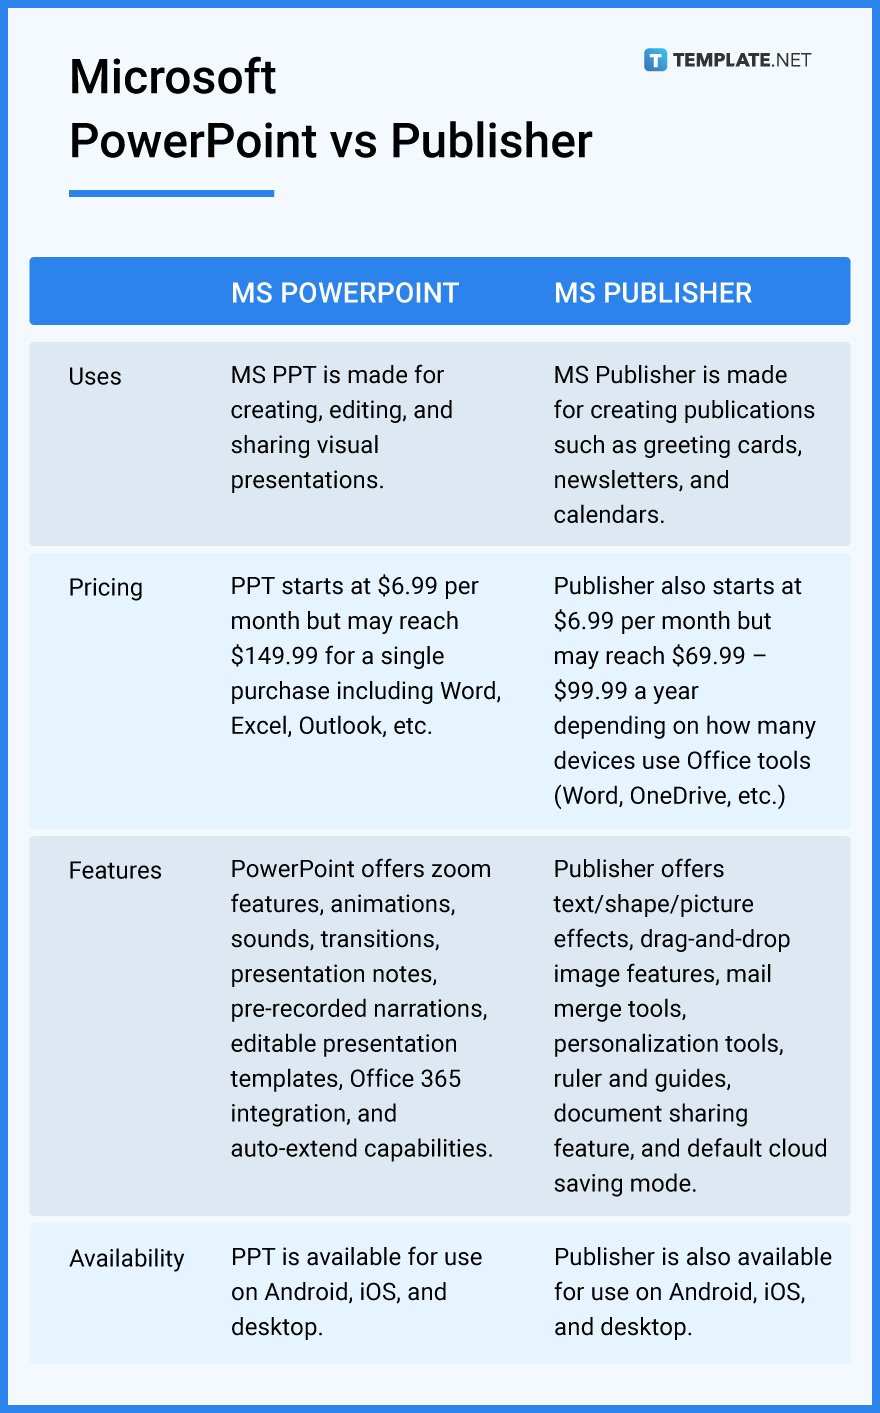 Microsoft PowerPoint - What is Microsoft PowerPoint? Definition, Uses